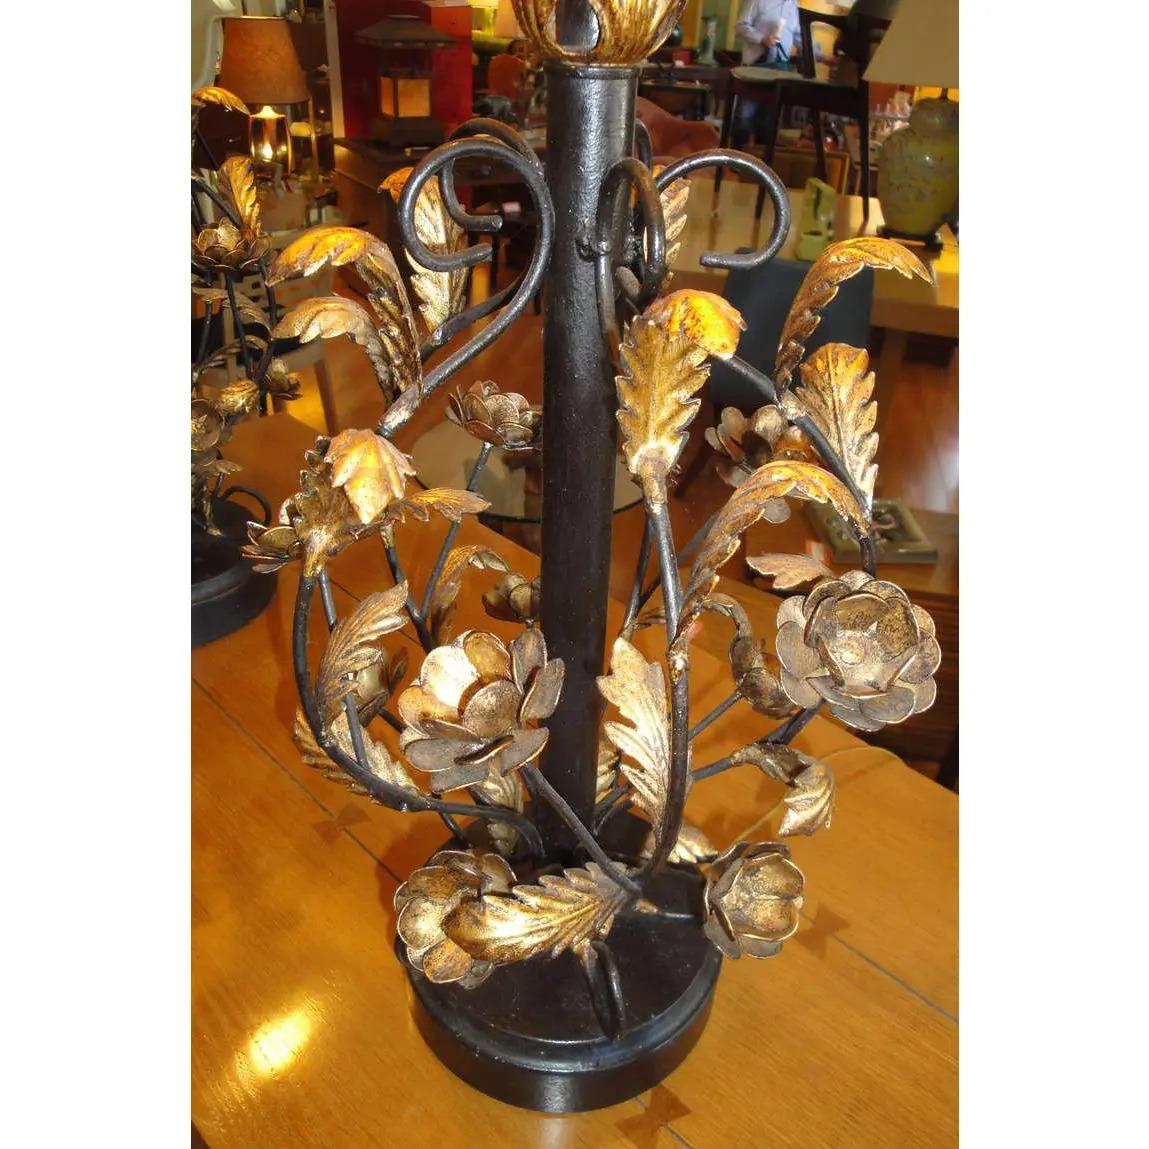 Classic Italian gilt metal and painted steel floral table lamps. Excellent original painted and gilt finish. Three-way sockets. lamp shades included.